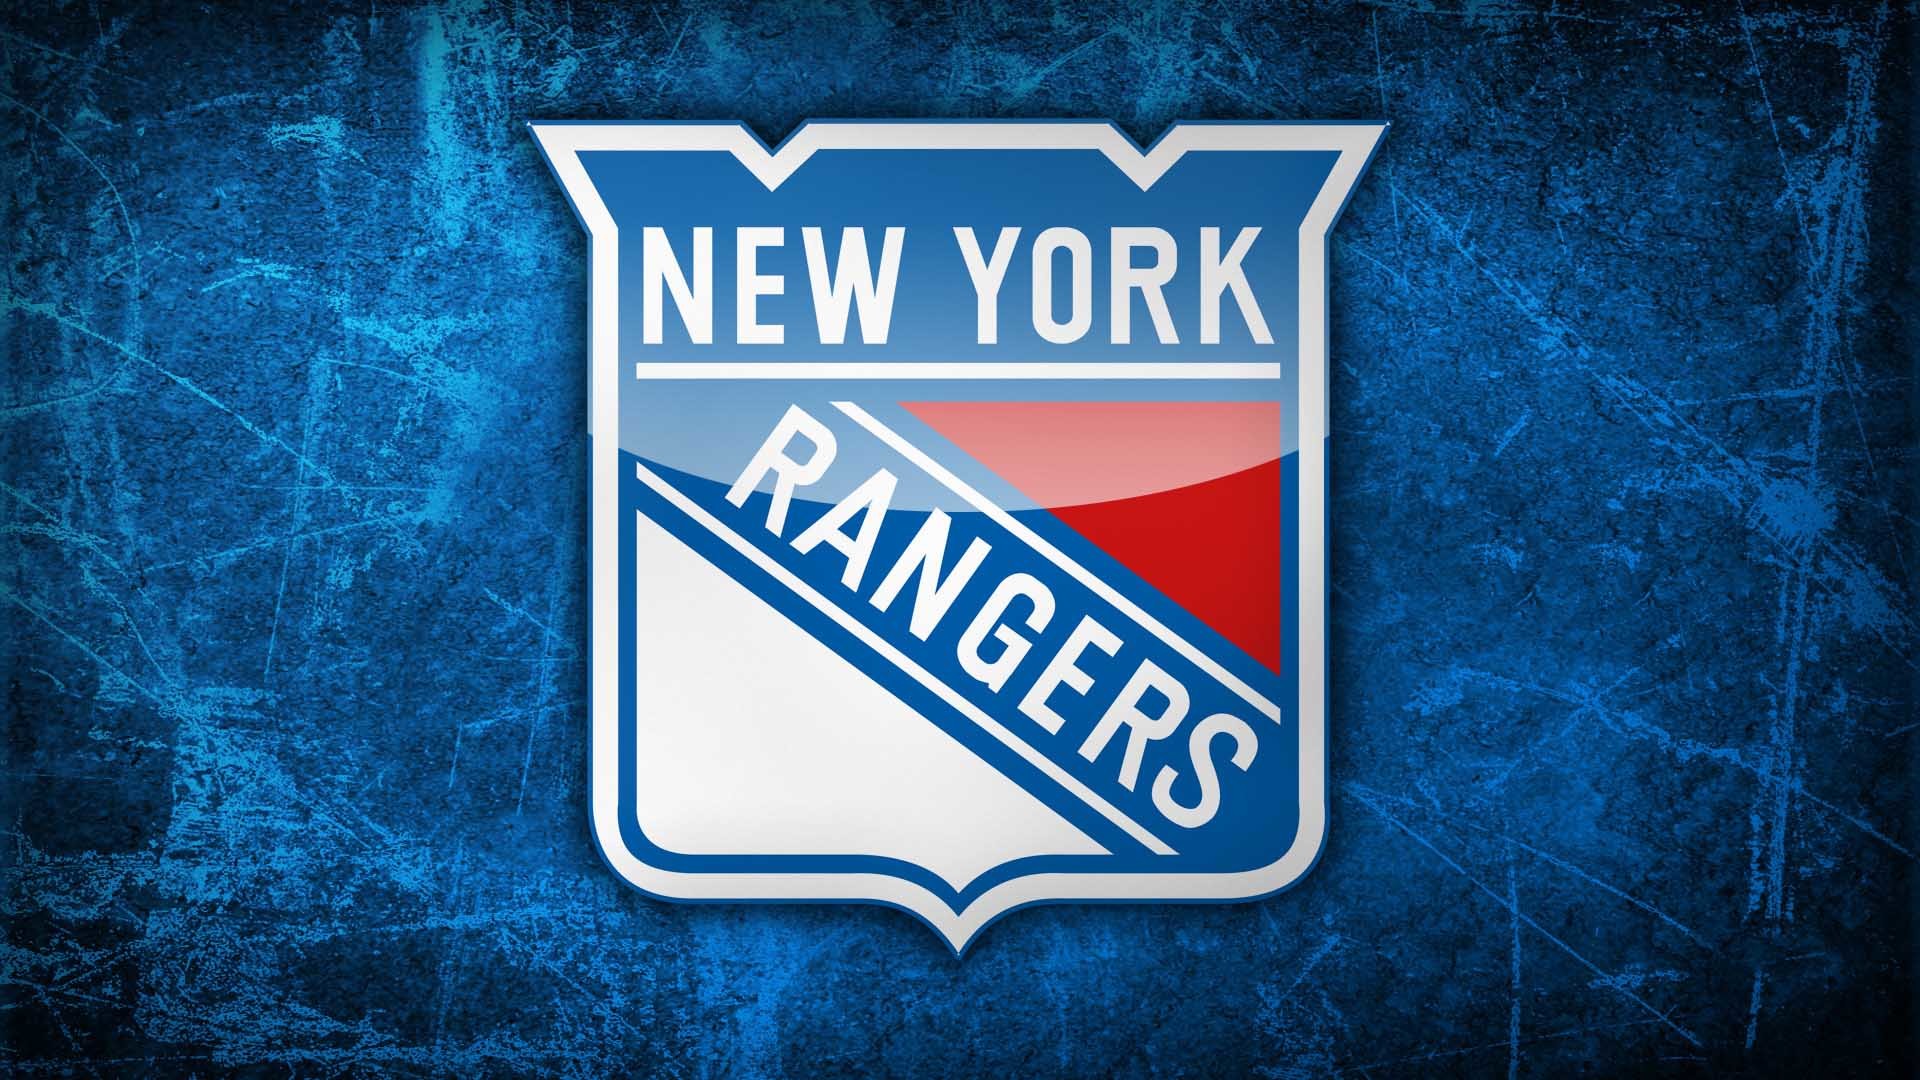 1920x1080 New York Rangers Wallpaper Collection For Free Download | HD Wallpapers |  Pinterest | Wallpaper